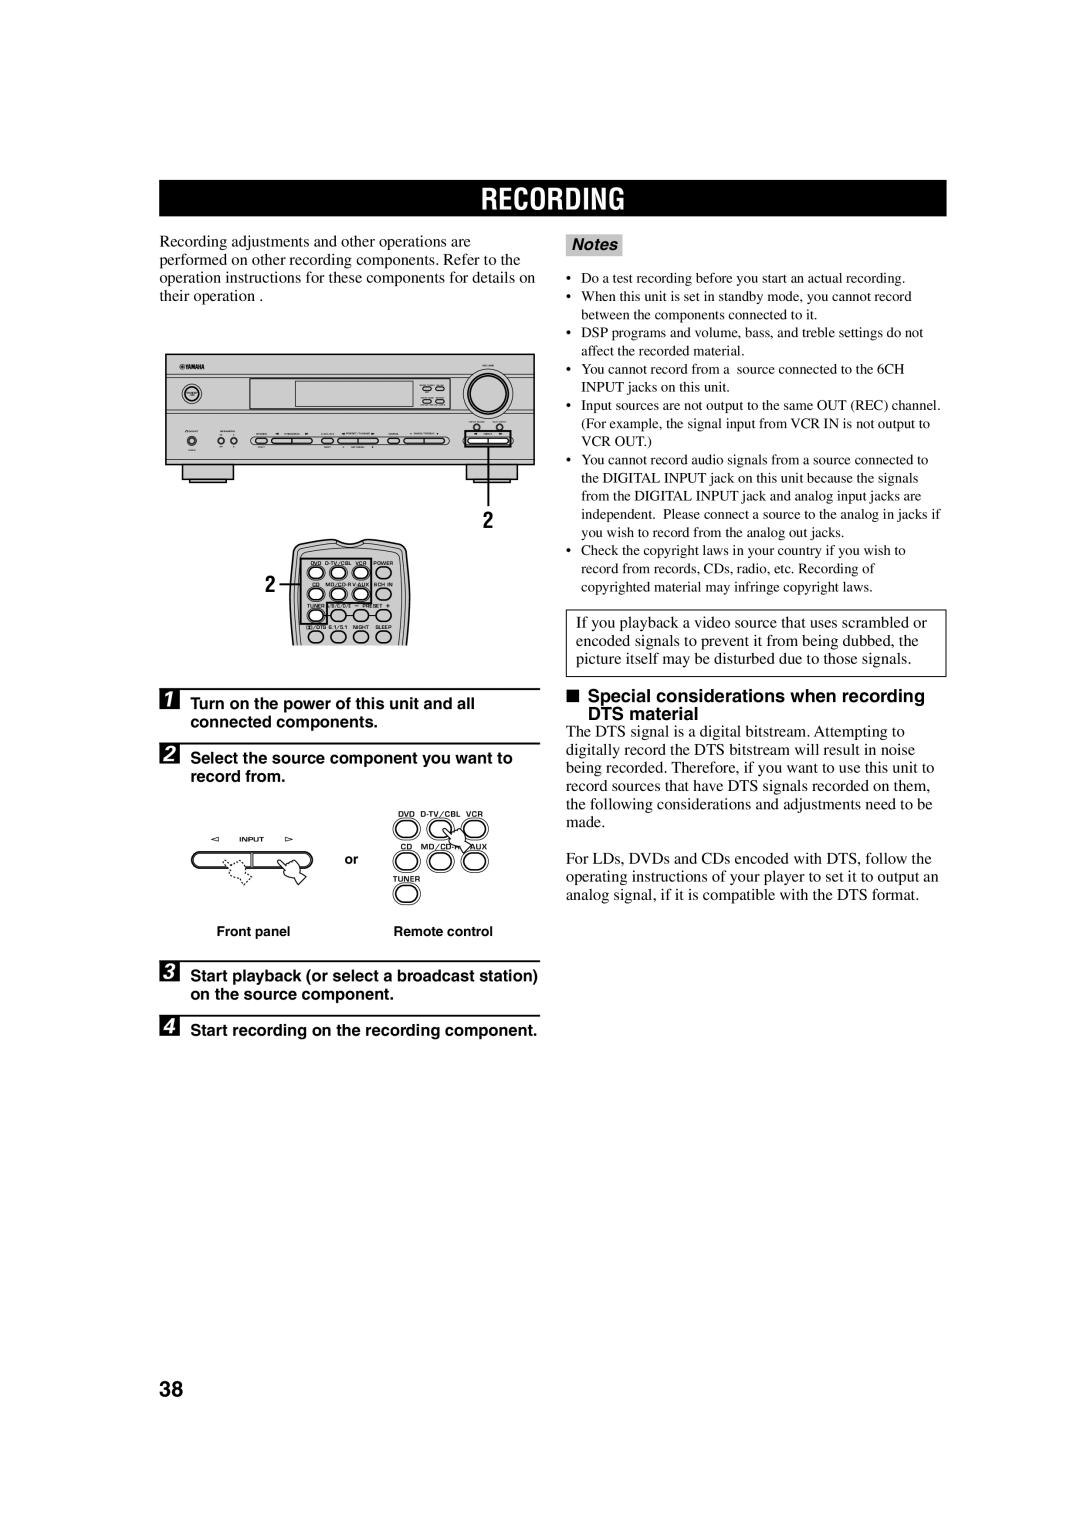 Yamaha HTR-5630RDS owner manual Recording, Special considerations when recording DTS material 